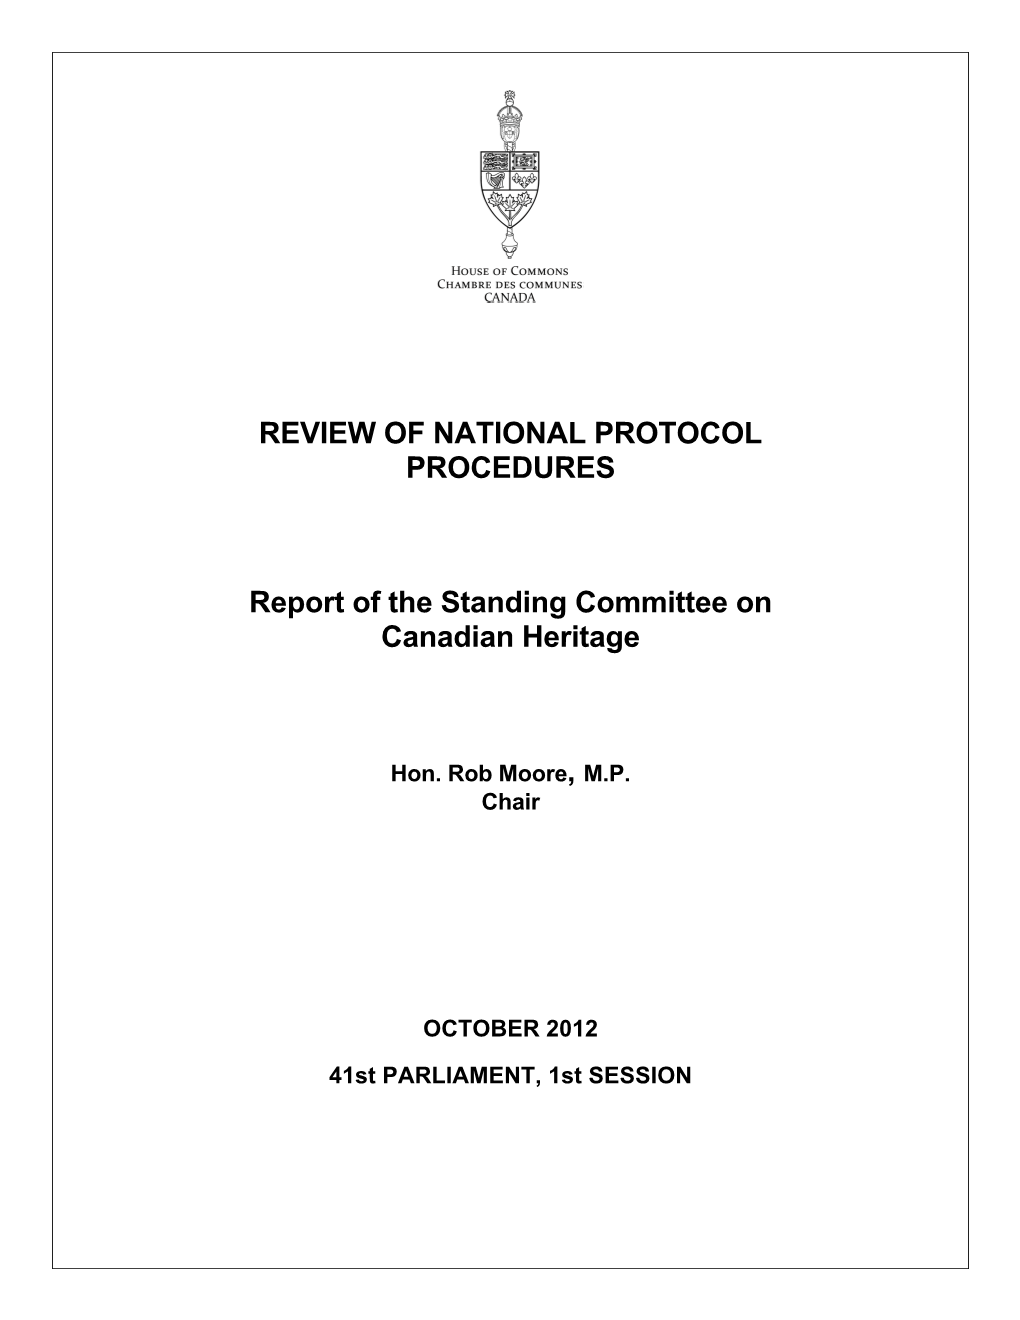 REVIEW of NATIONAL PROTOCOL PROCEDURES Report of The